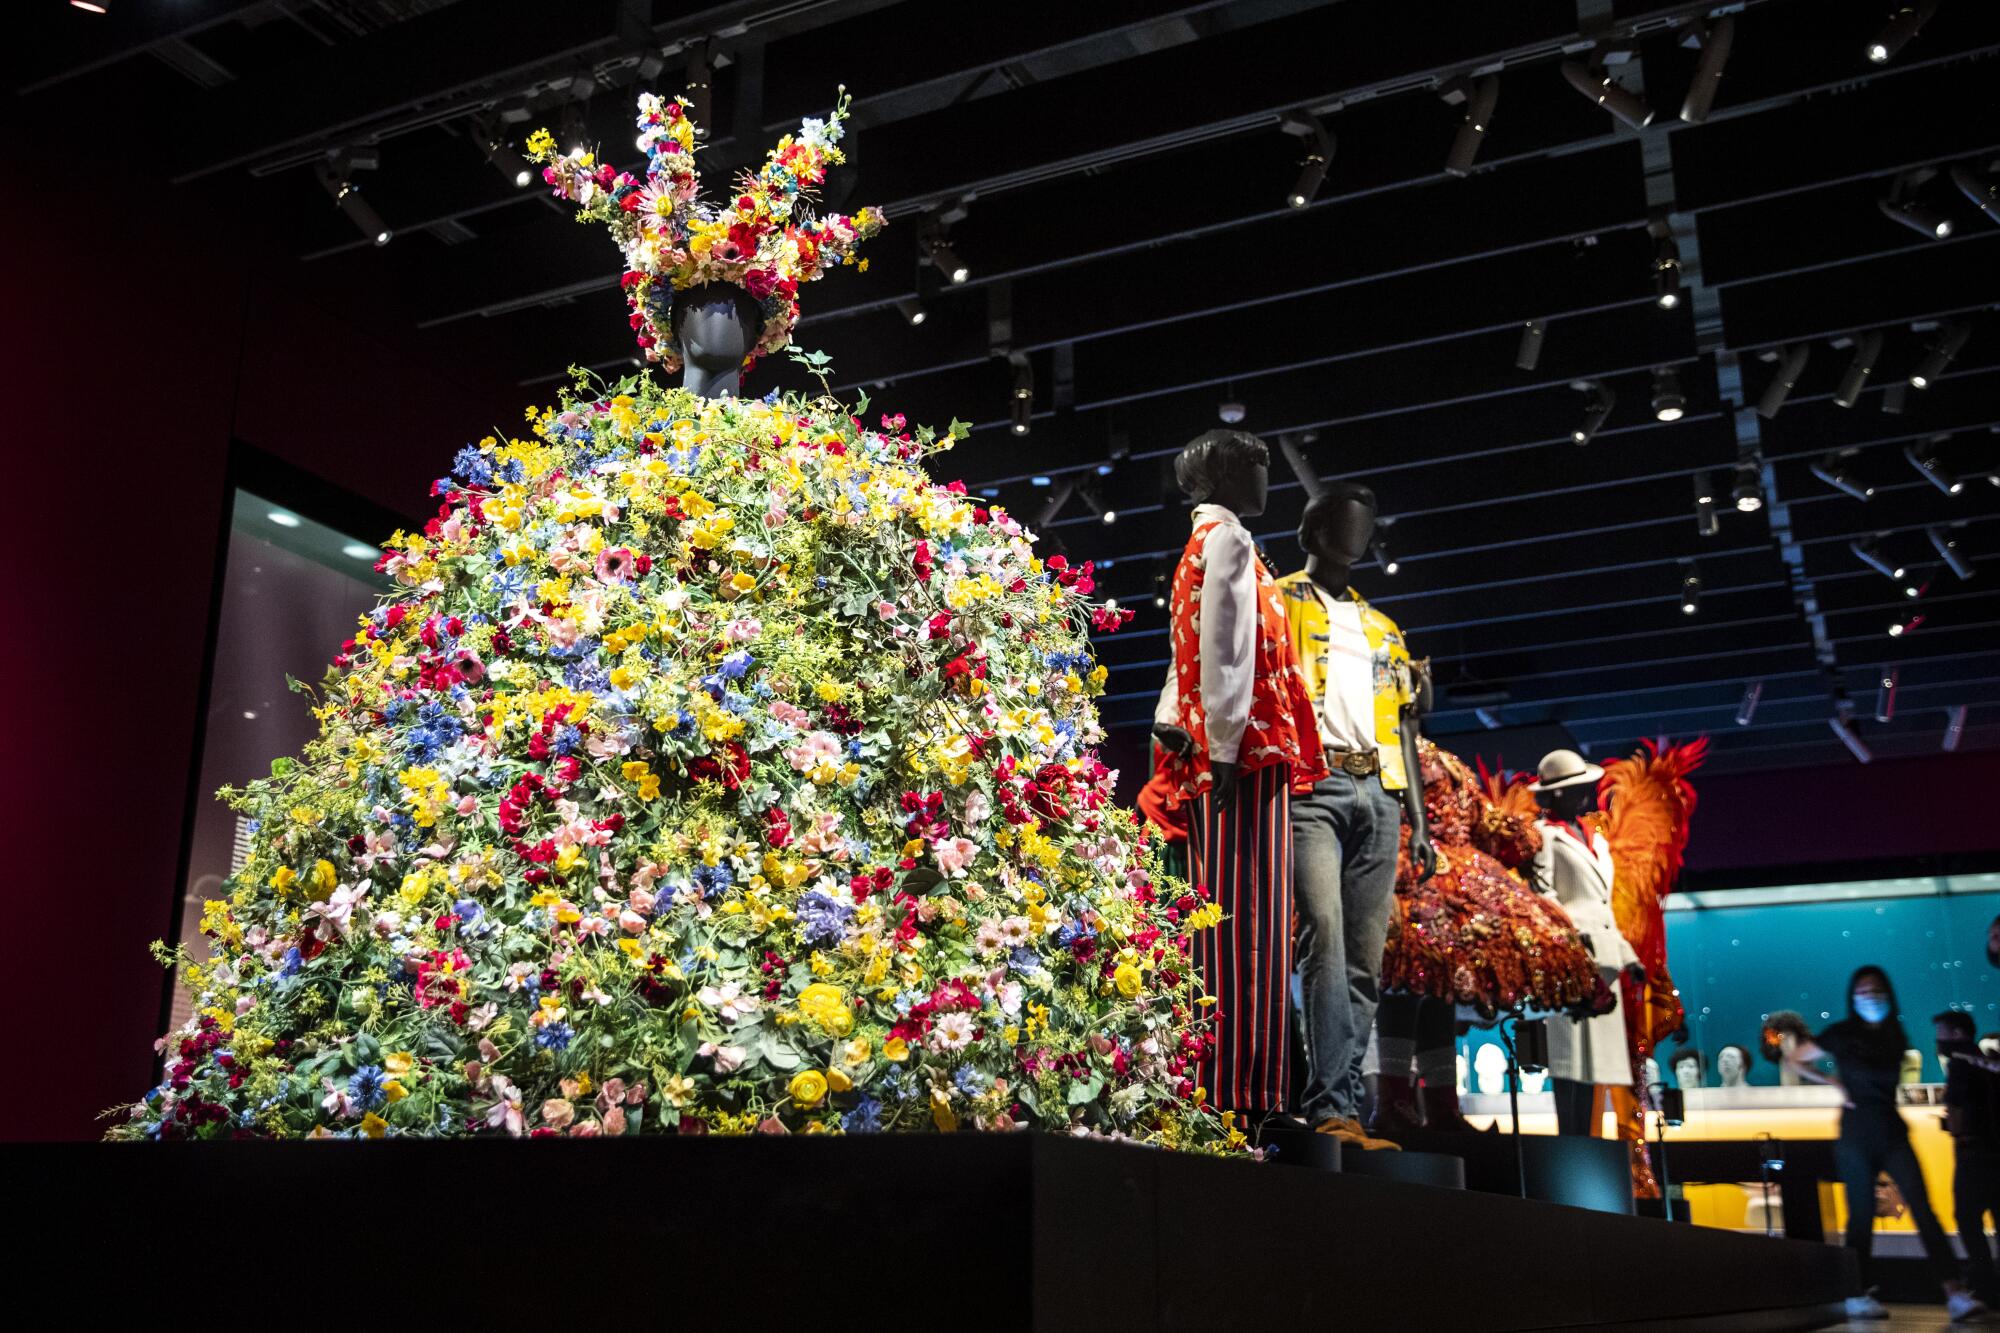 A large dress made of flowers and a headpiece made of flowers 